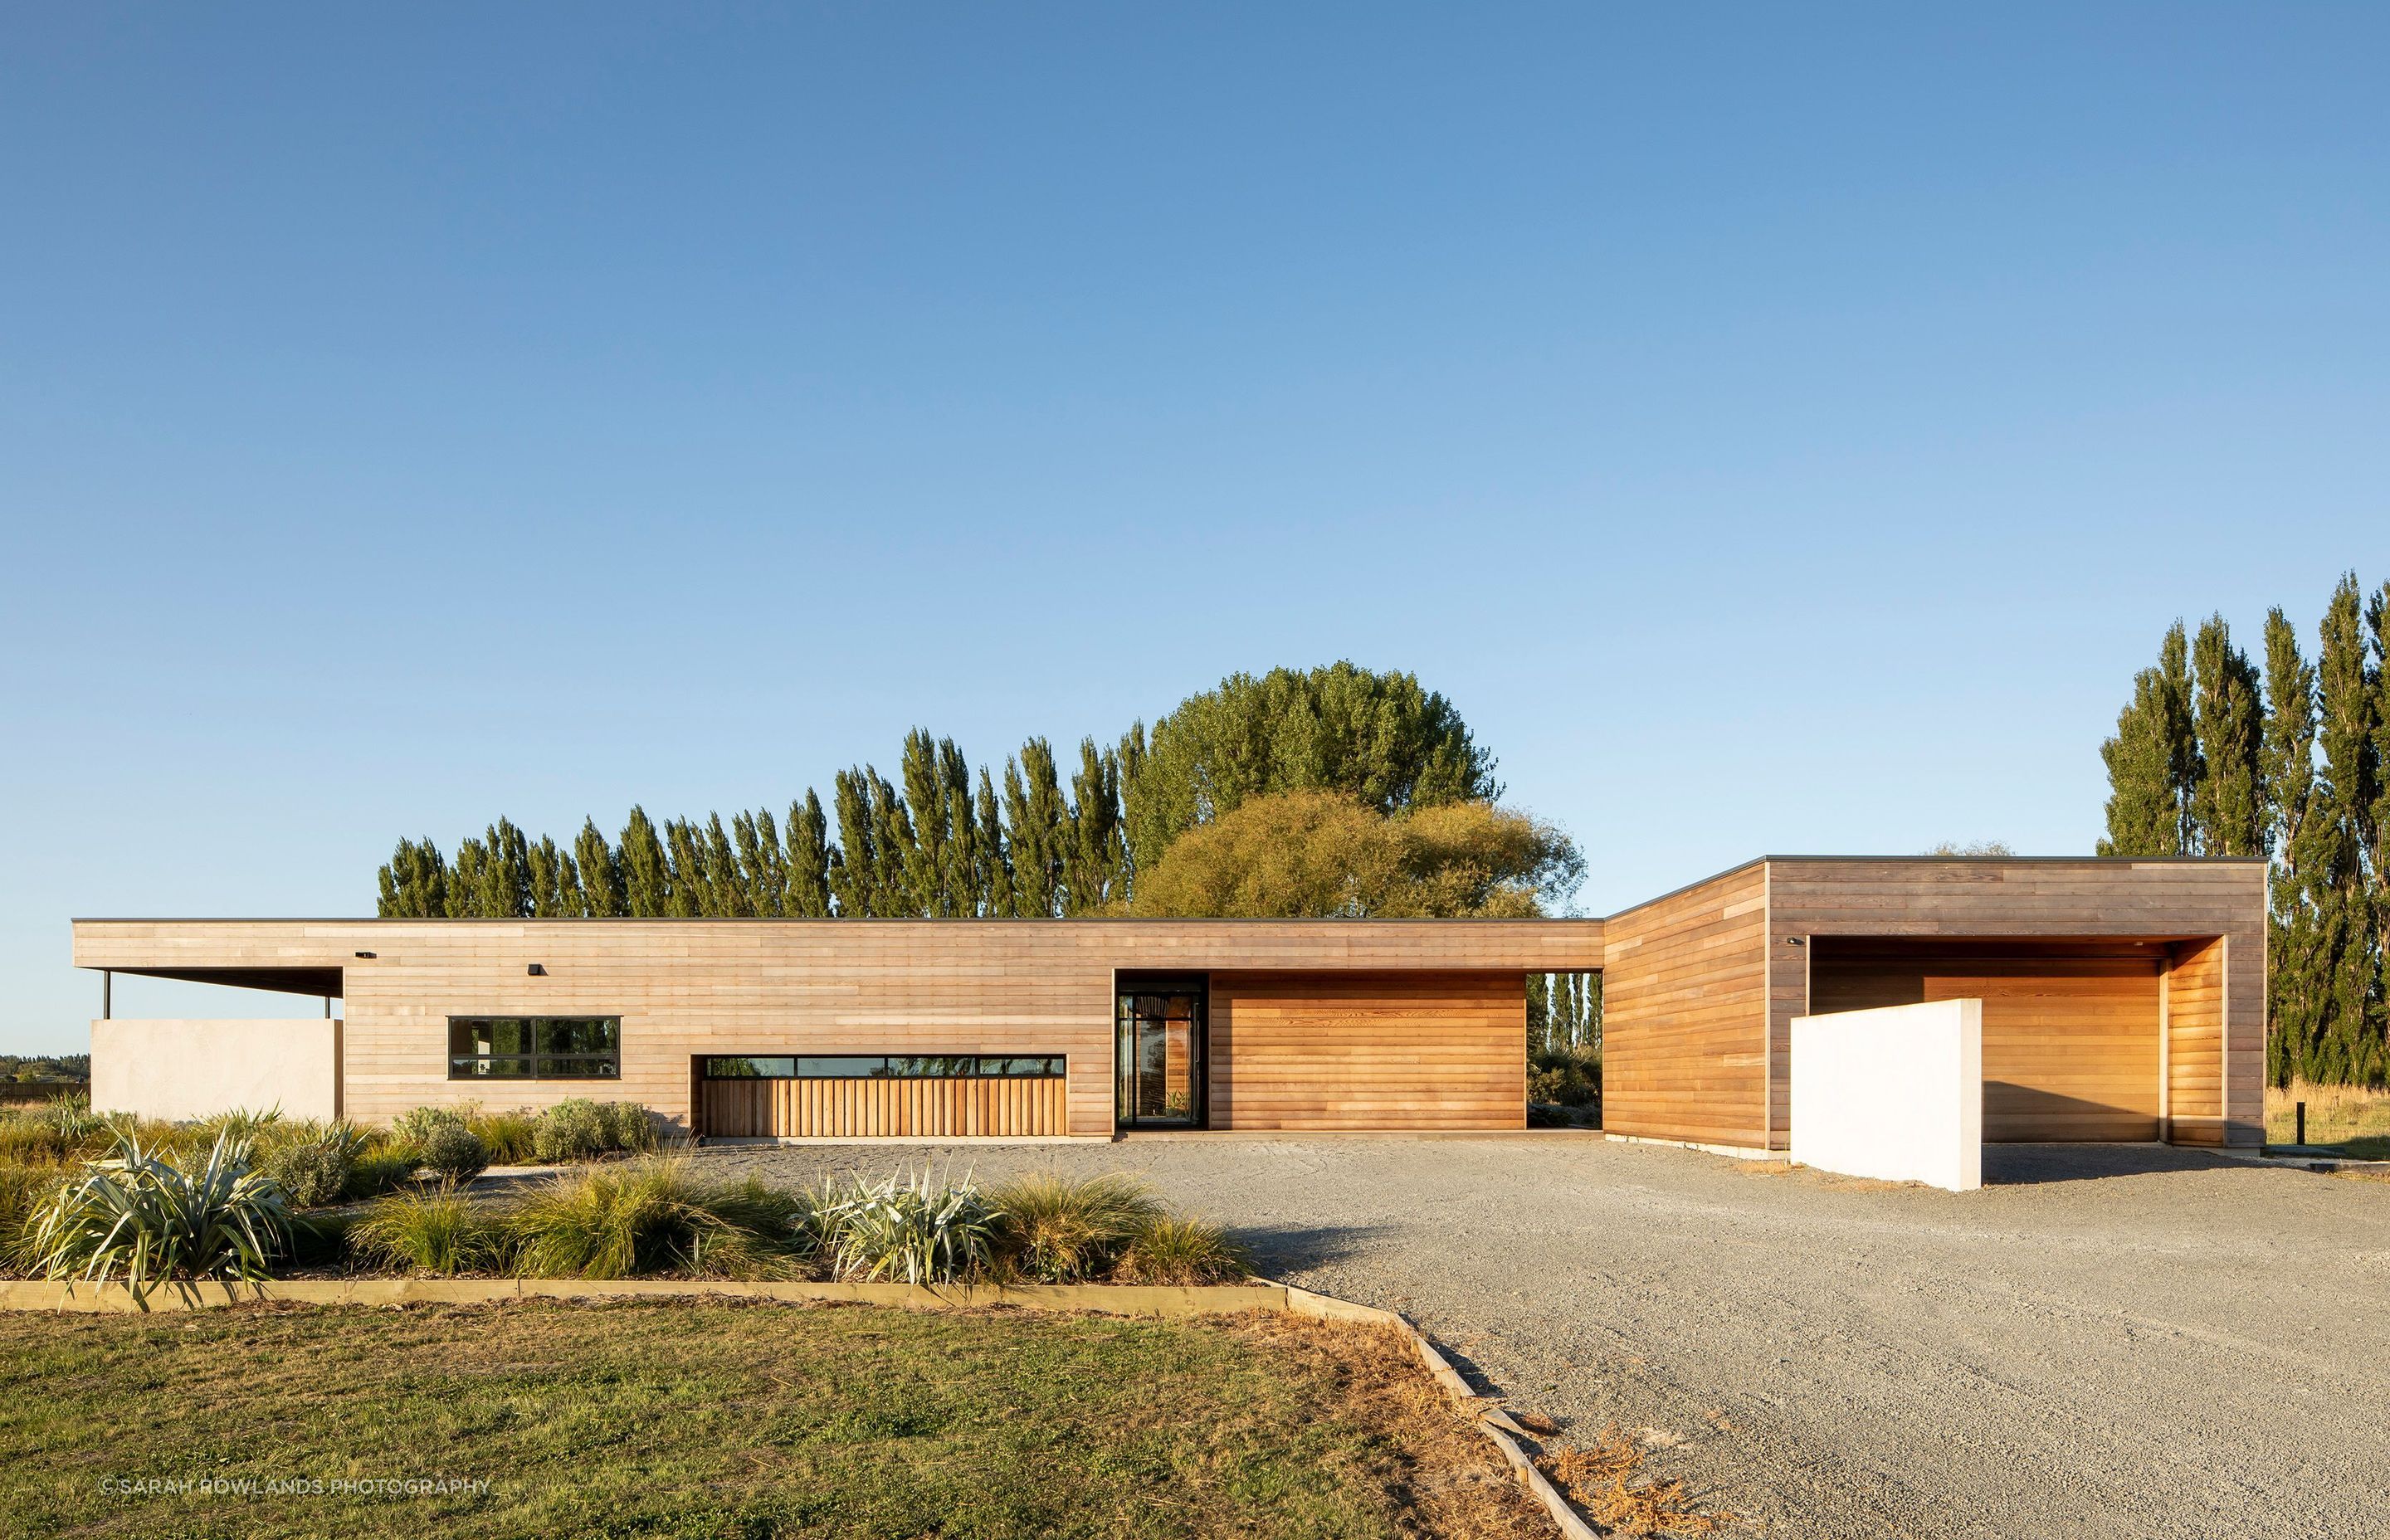 Clad in horizontal cedar, the south-west elevation features an outdoor room on the left, the entrance/porch in the middle and the garage to the right, with a turning circle out front.